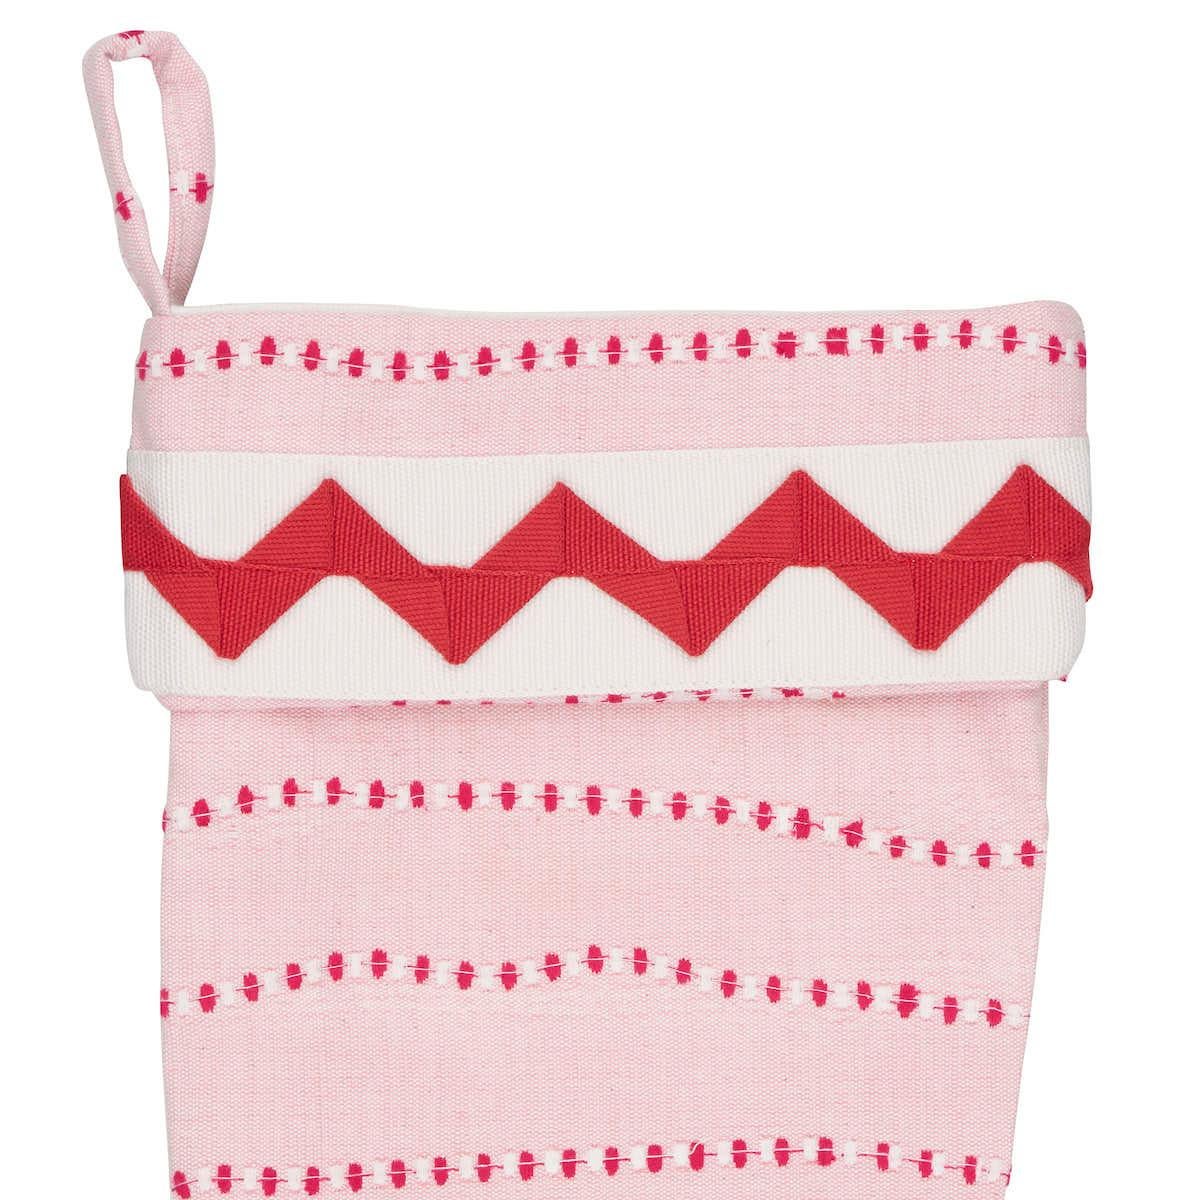 *Pre-order, available to ship in October.

The playful pink and red wavy lines of Schumacher’s Elodie Embroidery fill this limited-edition holiday stocking with candy-colored joy. The fabric’s unique rhythmic stripes intersect with a vibrant